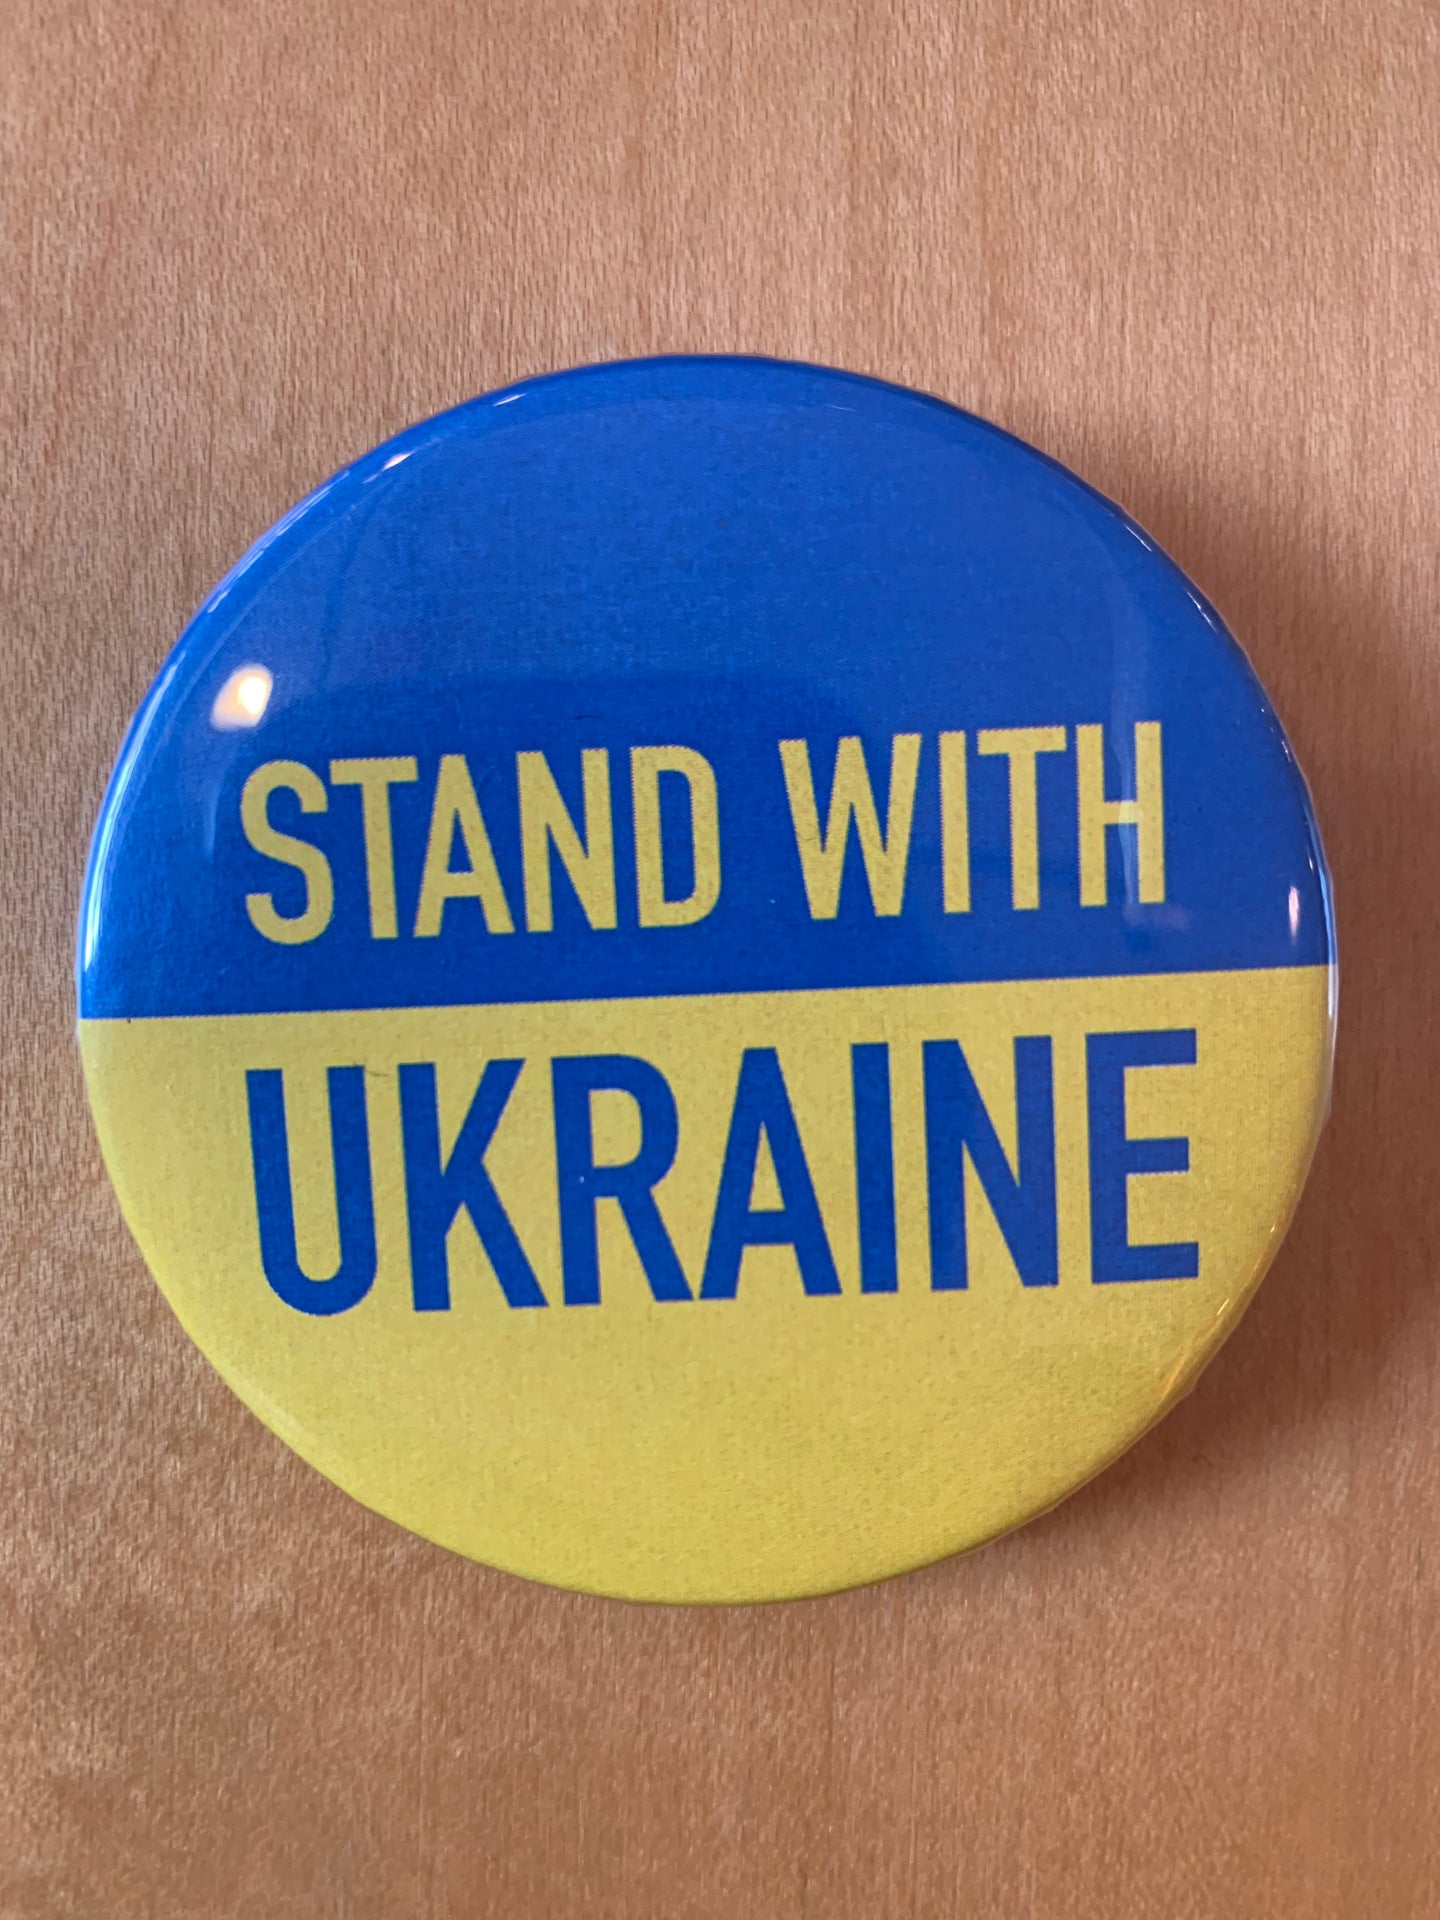 STAND WITH UKRAINE Ukrainian Flag Blue and yellow button